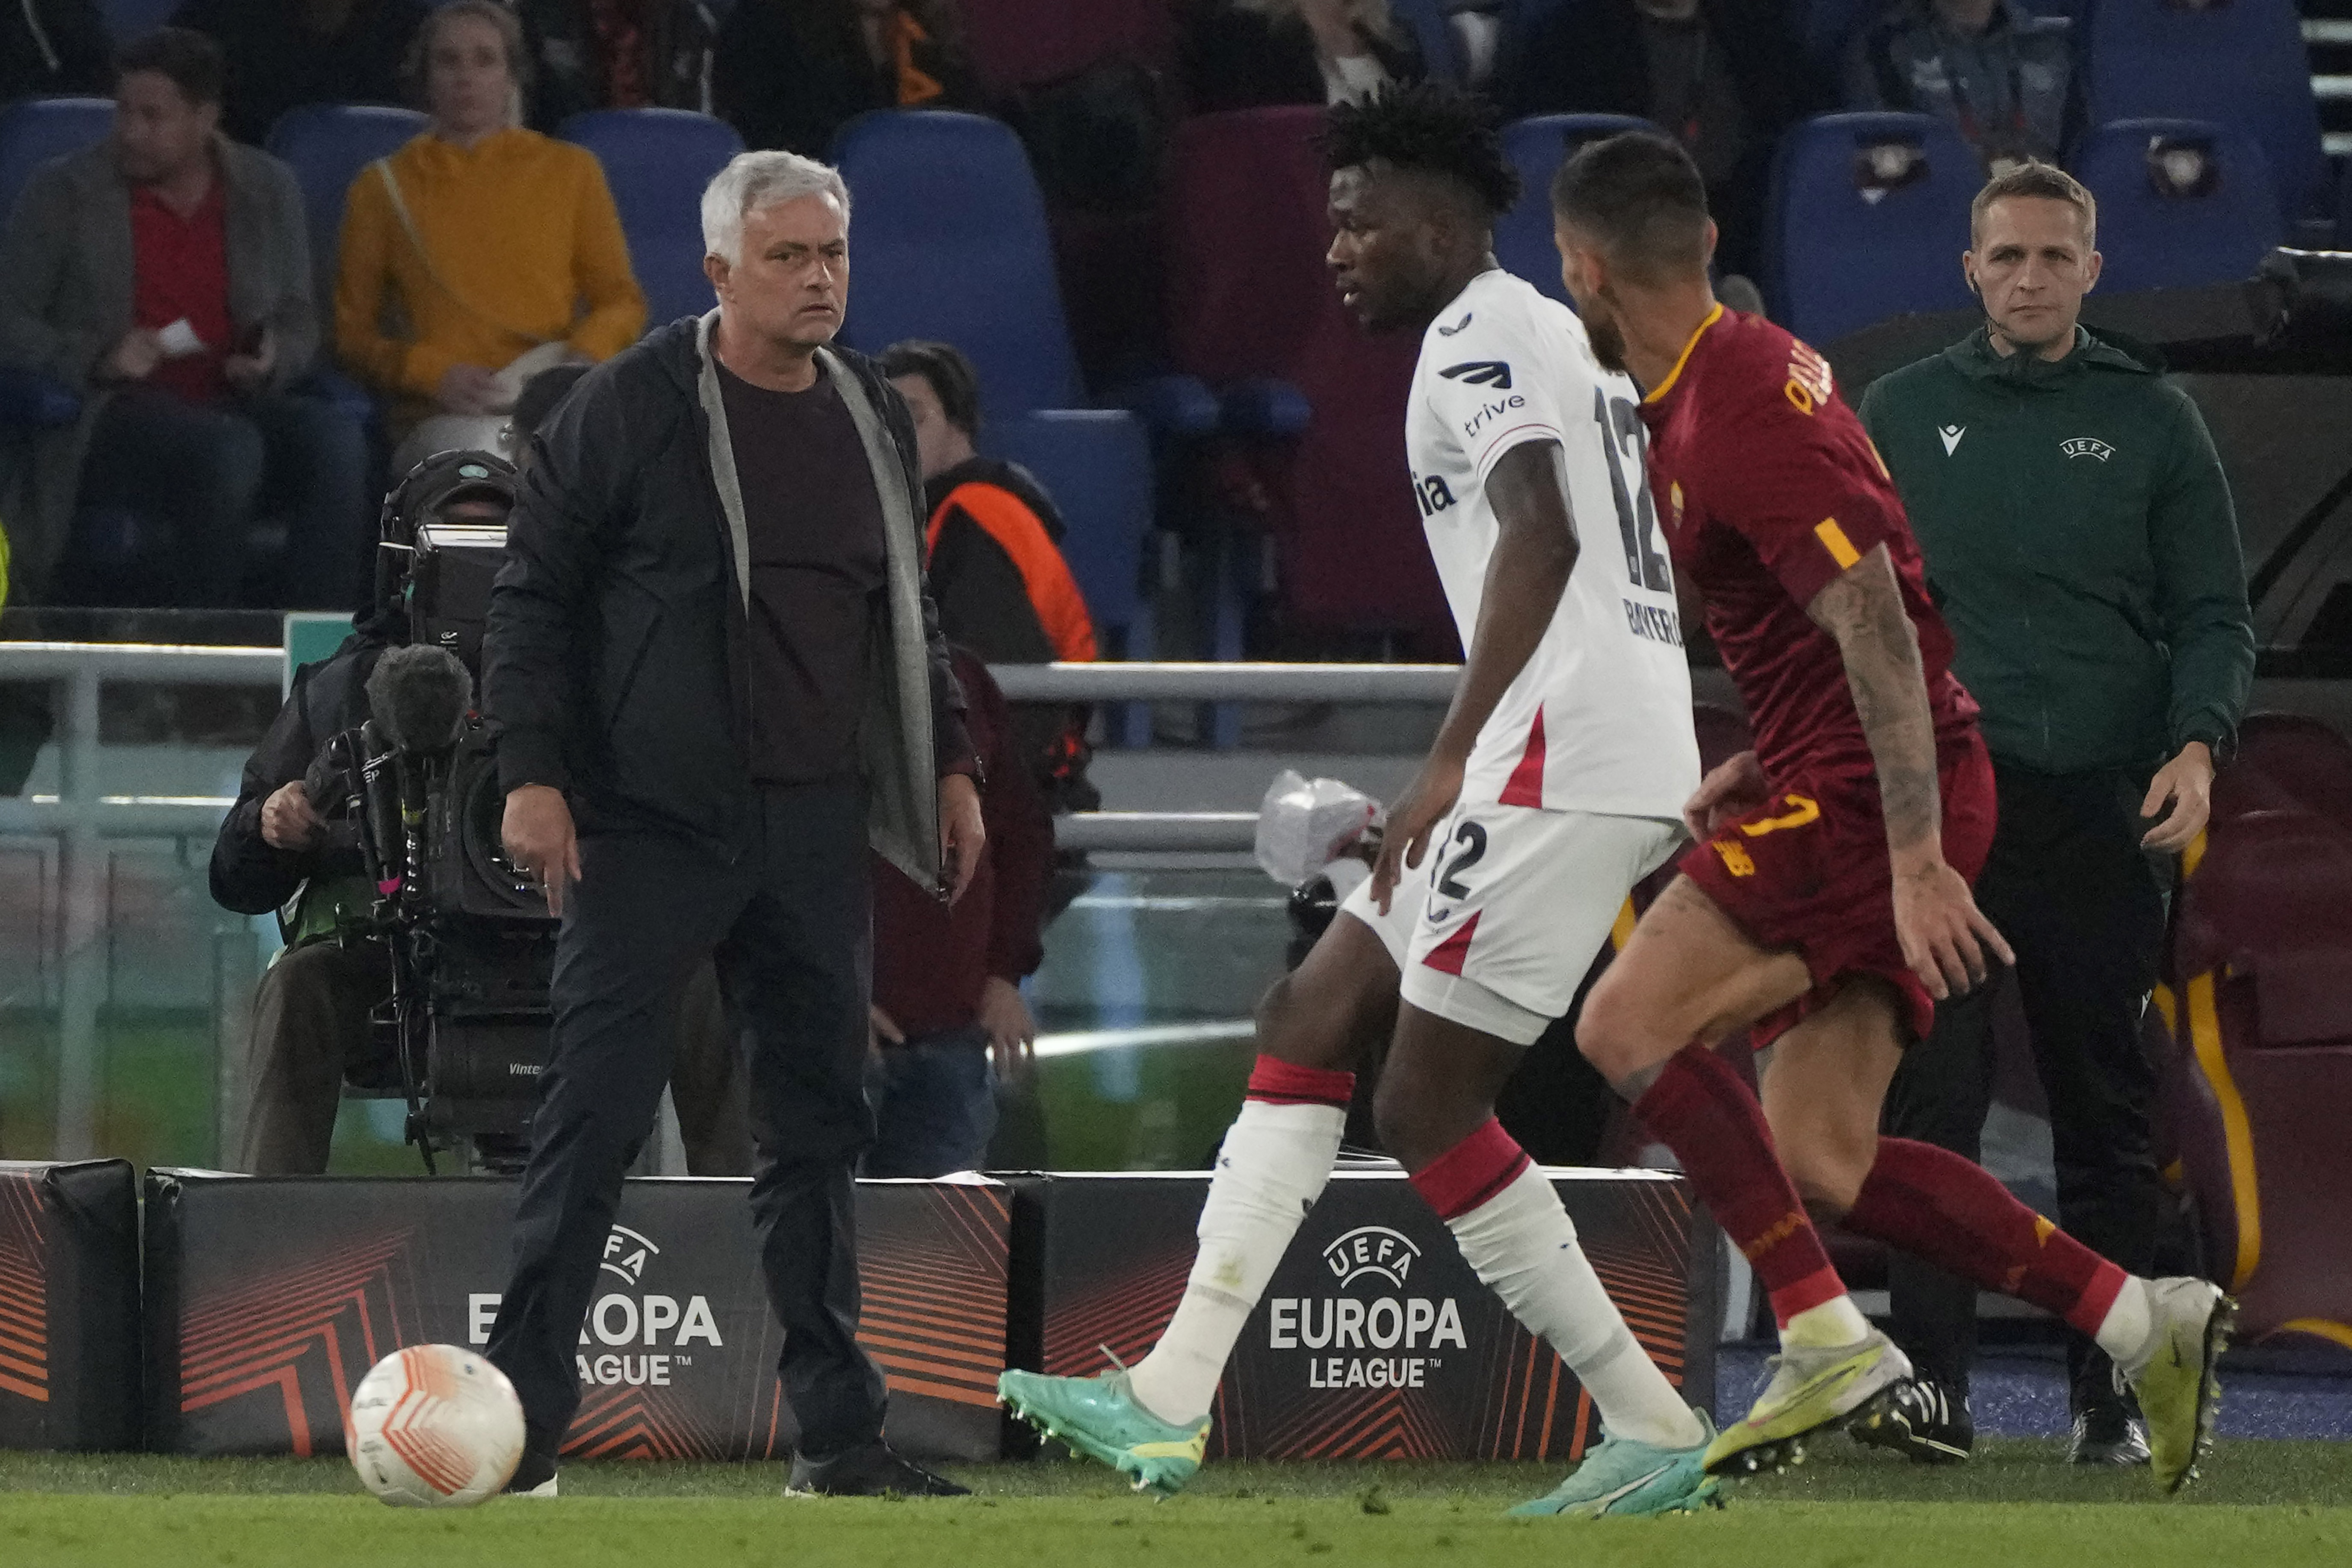 Europa League: Roma's first game away at Sheriff - AS Roma